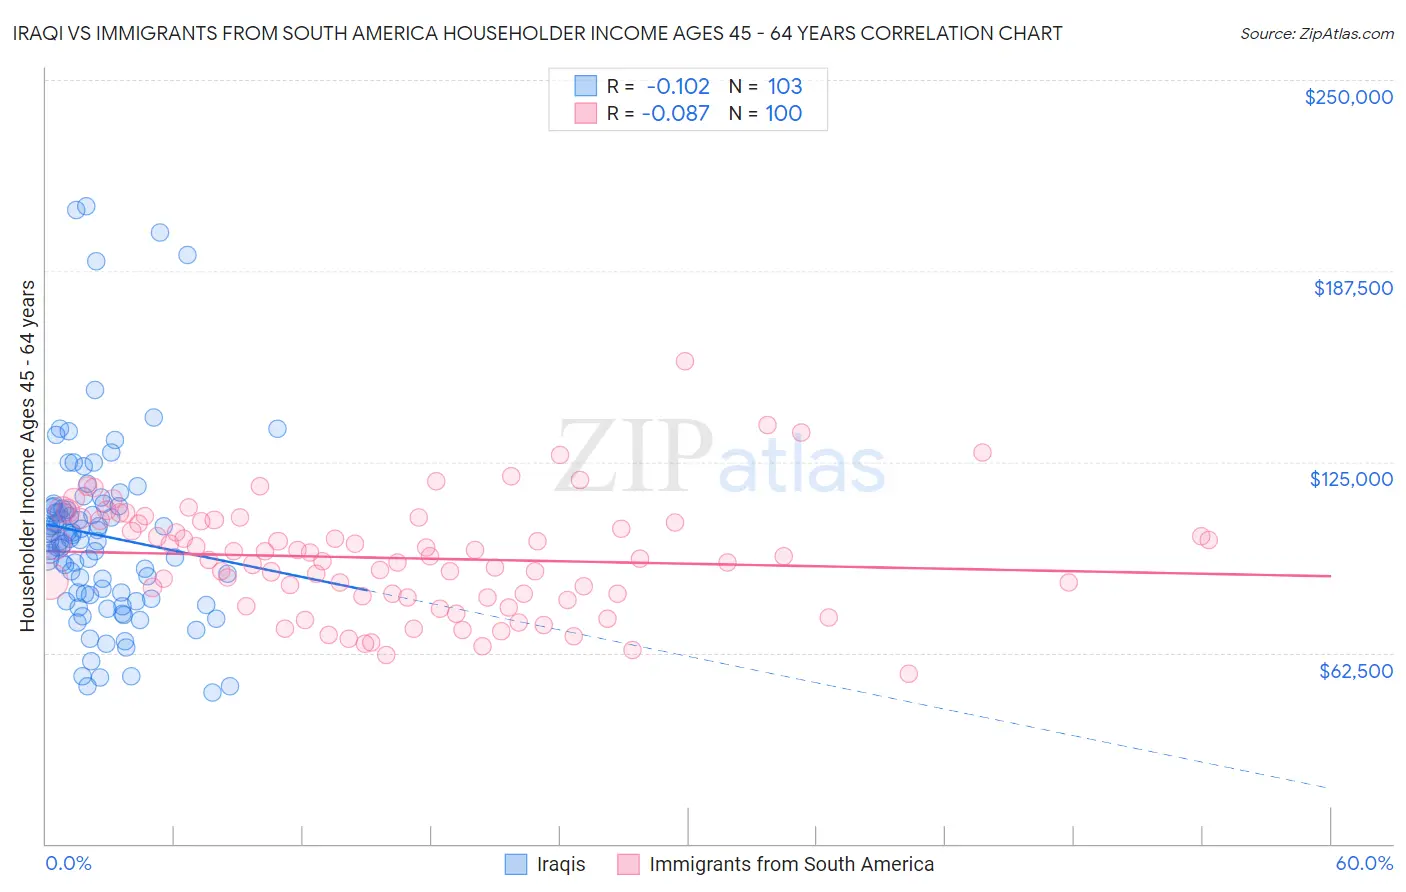 Iraqi vs Immigrants from South America Householder Income Ages 45 - 64 years